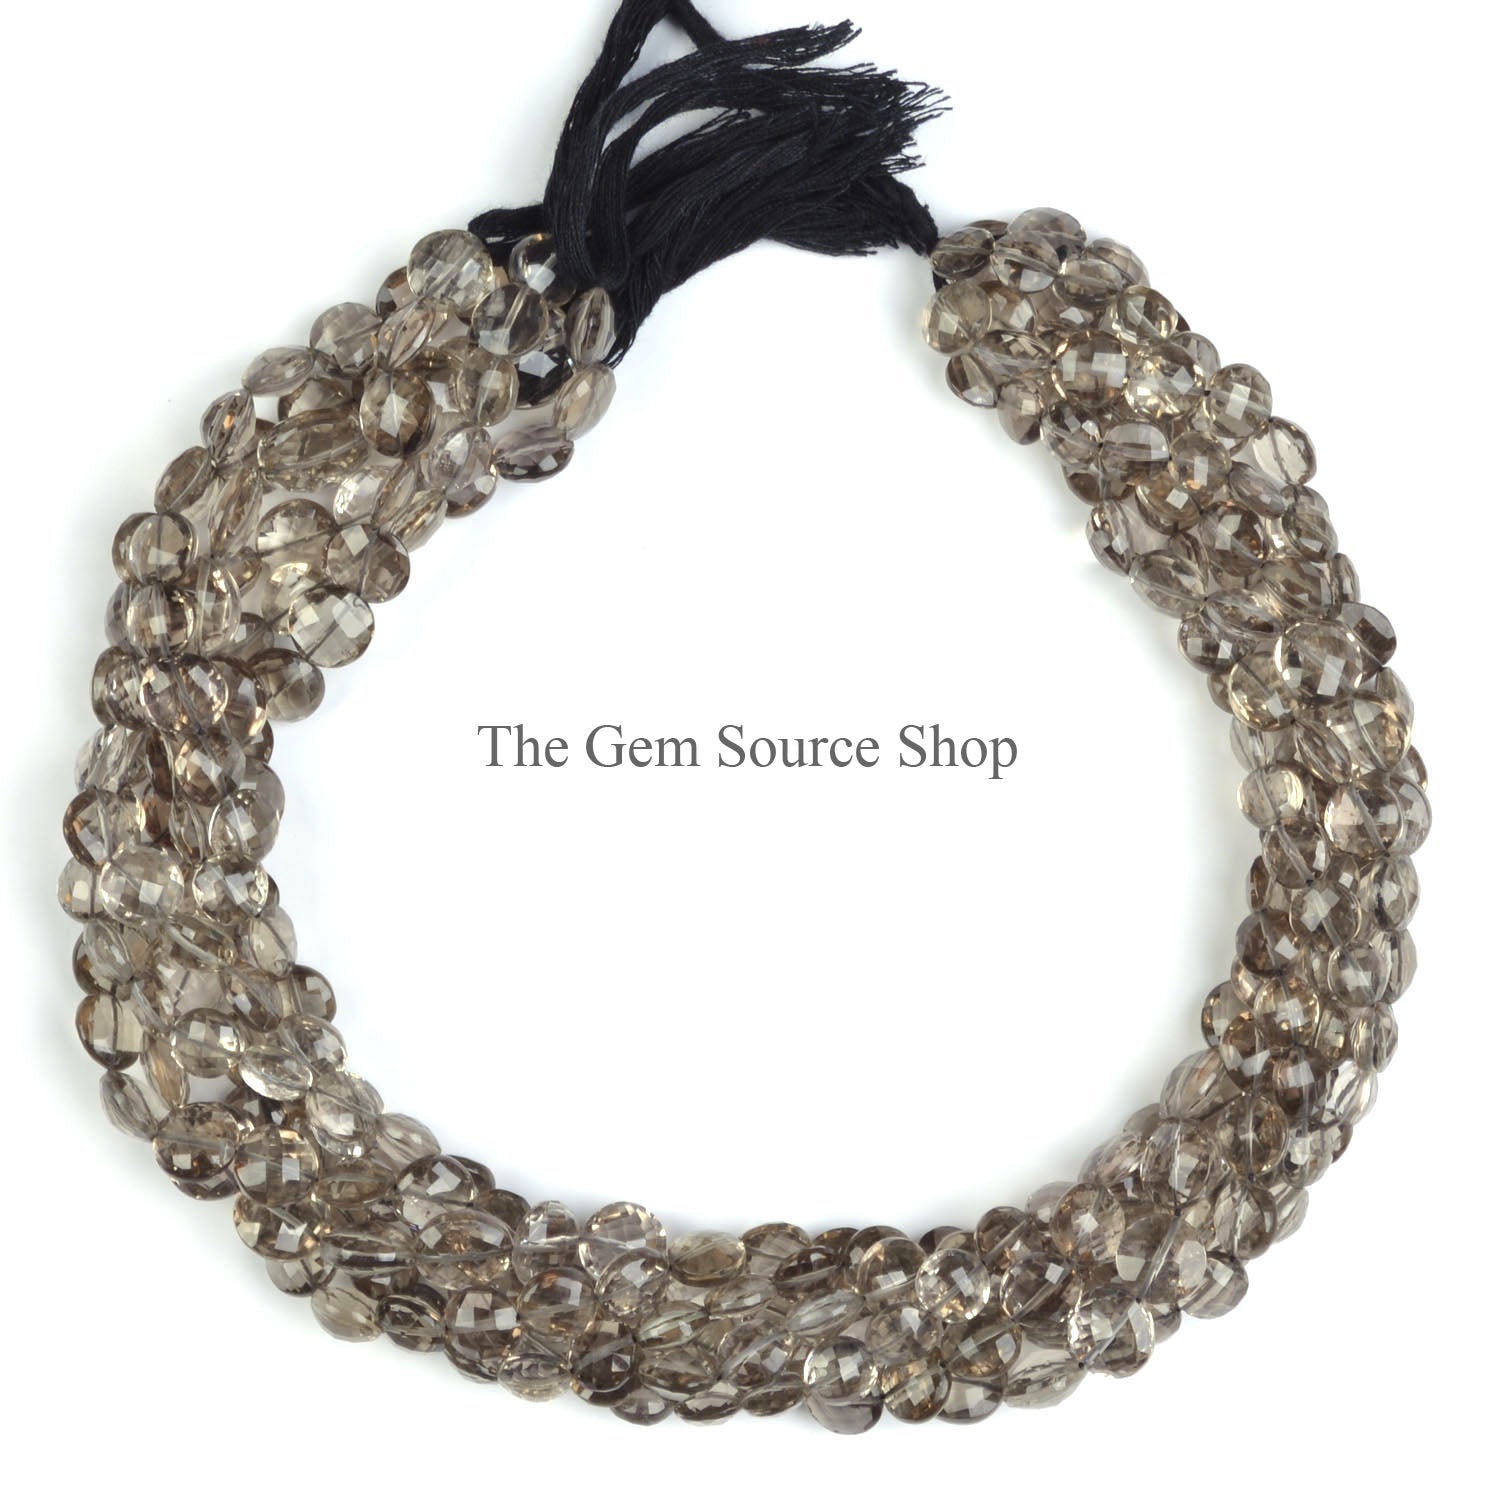 Smoky Quartz Beads, Faceted Coin Shape Beads, Smoky Quartz Gemstone Beads, Wholesale Beads